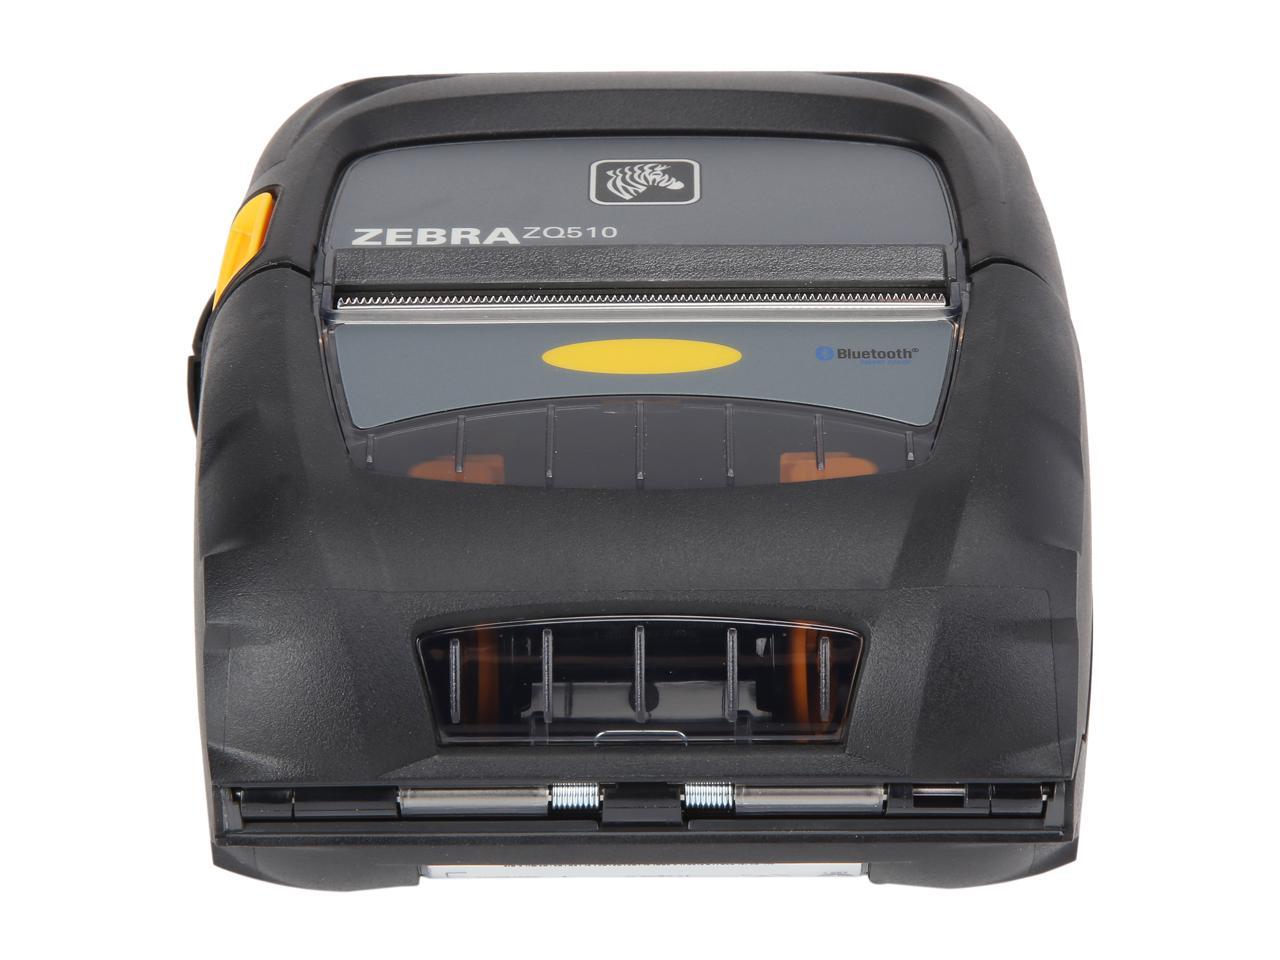 Zebra Zq510 3 Mobile Direct Thermal Receipt And Label Printer 203 Dpi Bluetooth 40 Linered 1434